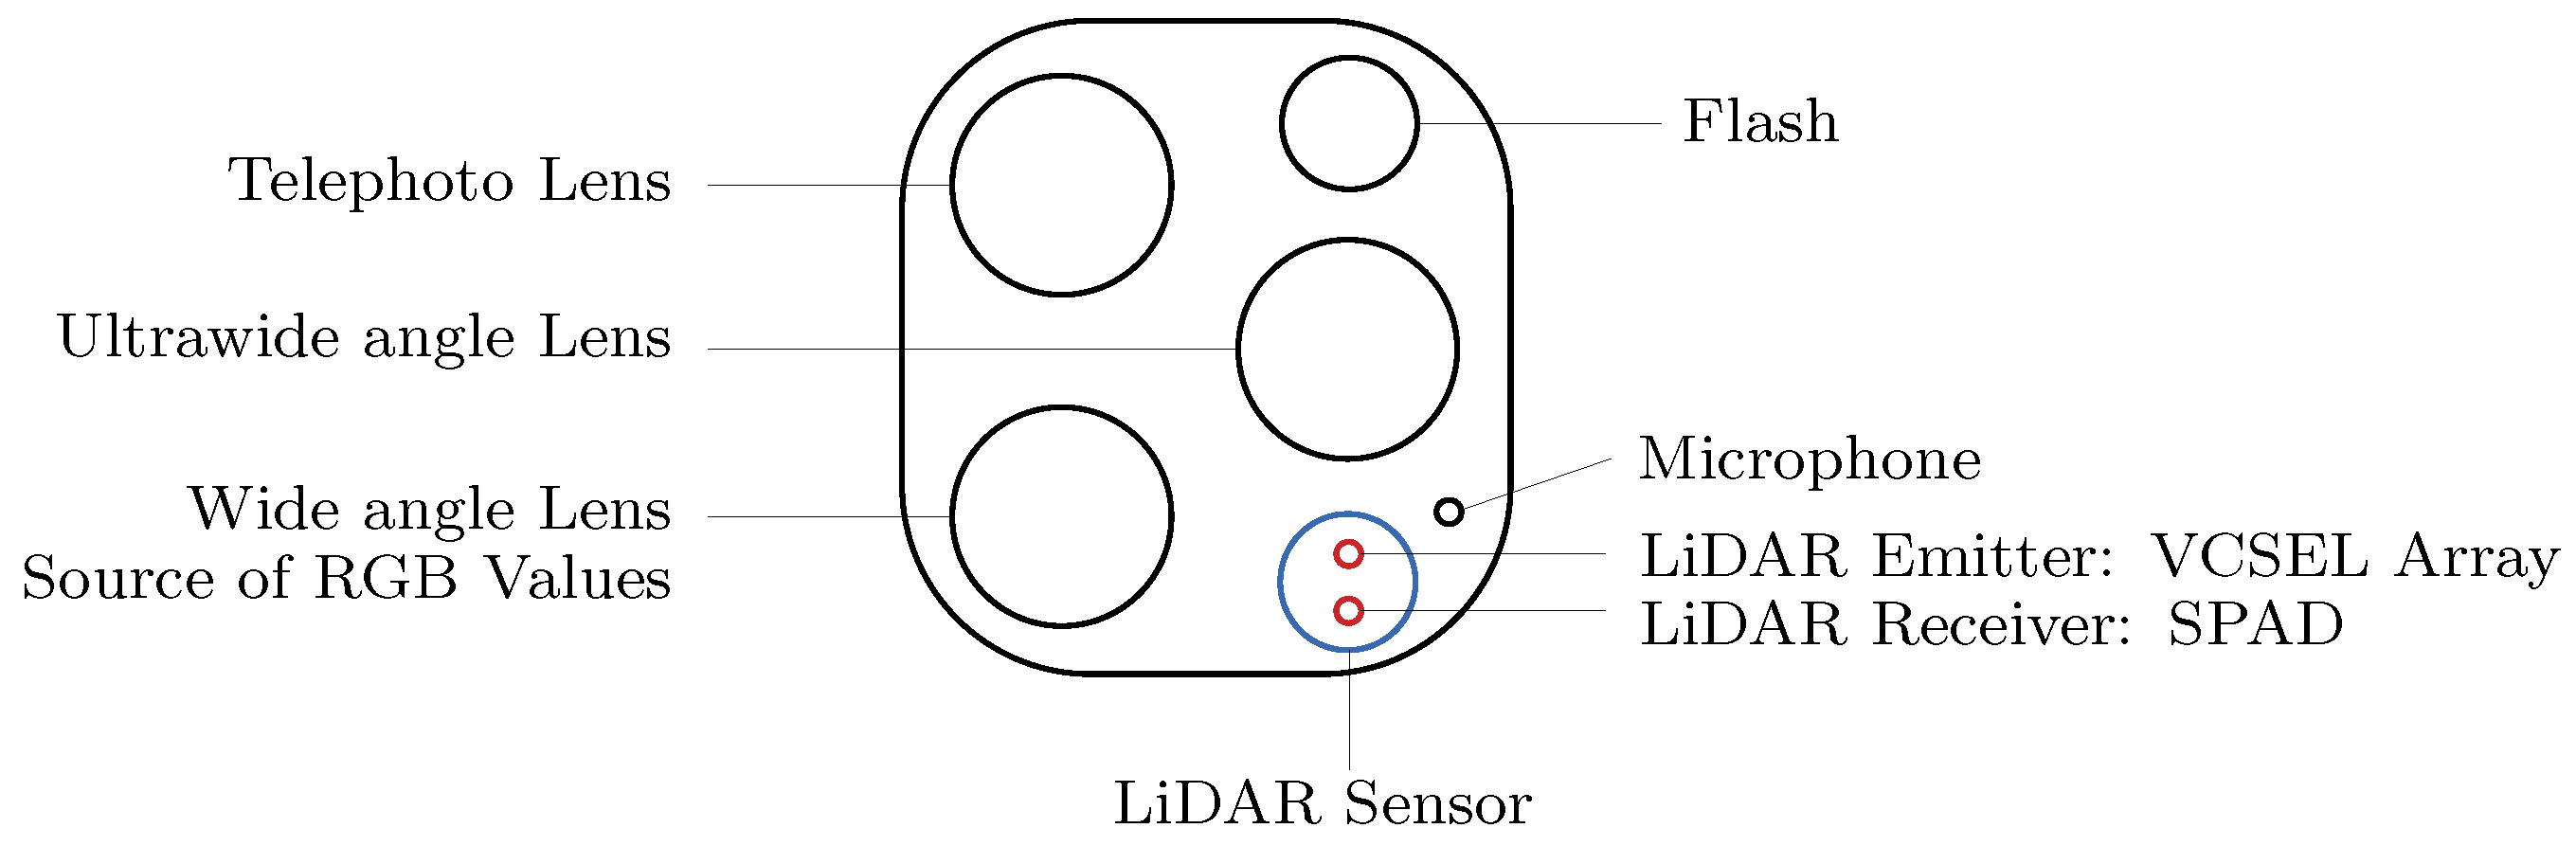 Sensors | Free Full-Text | Characterization of the iPhone LiDAR-Based  Sensing System for Vibration Measurement and Modal Analysis